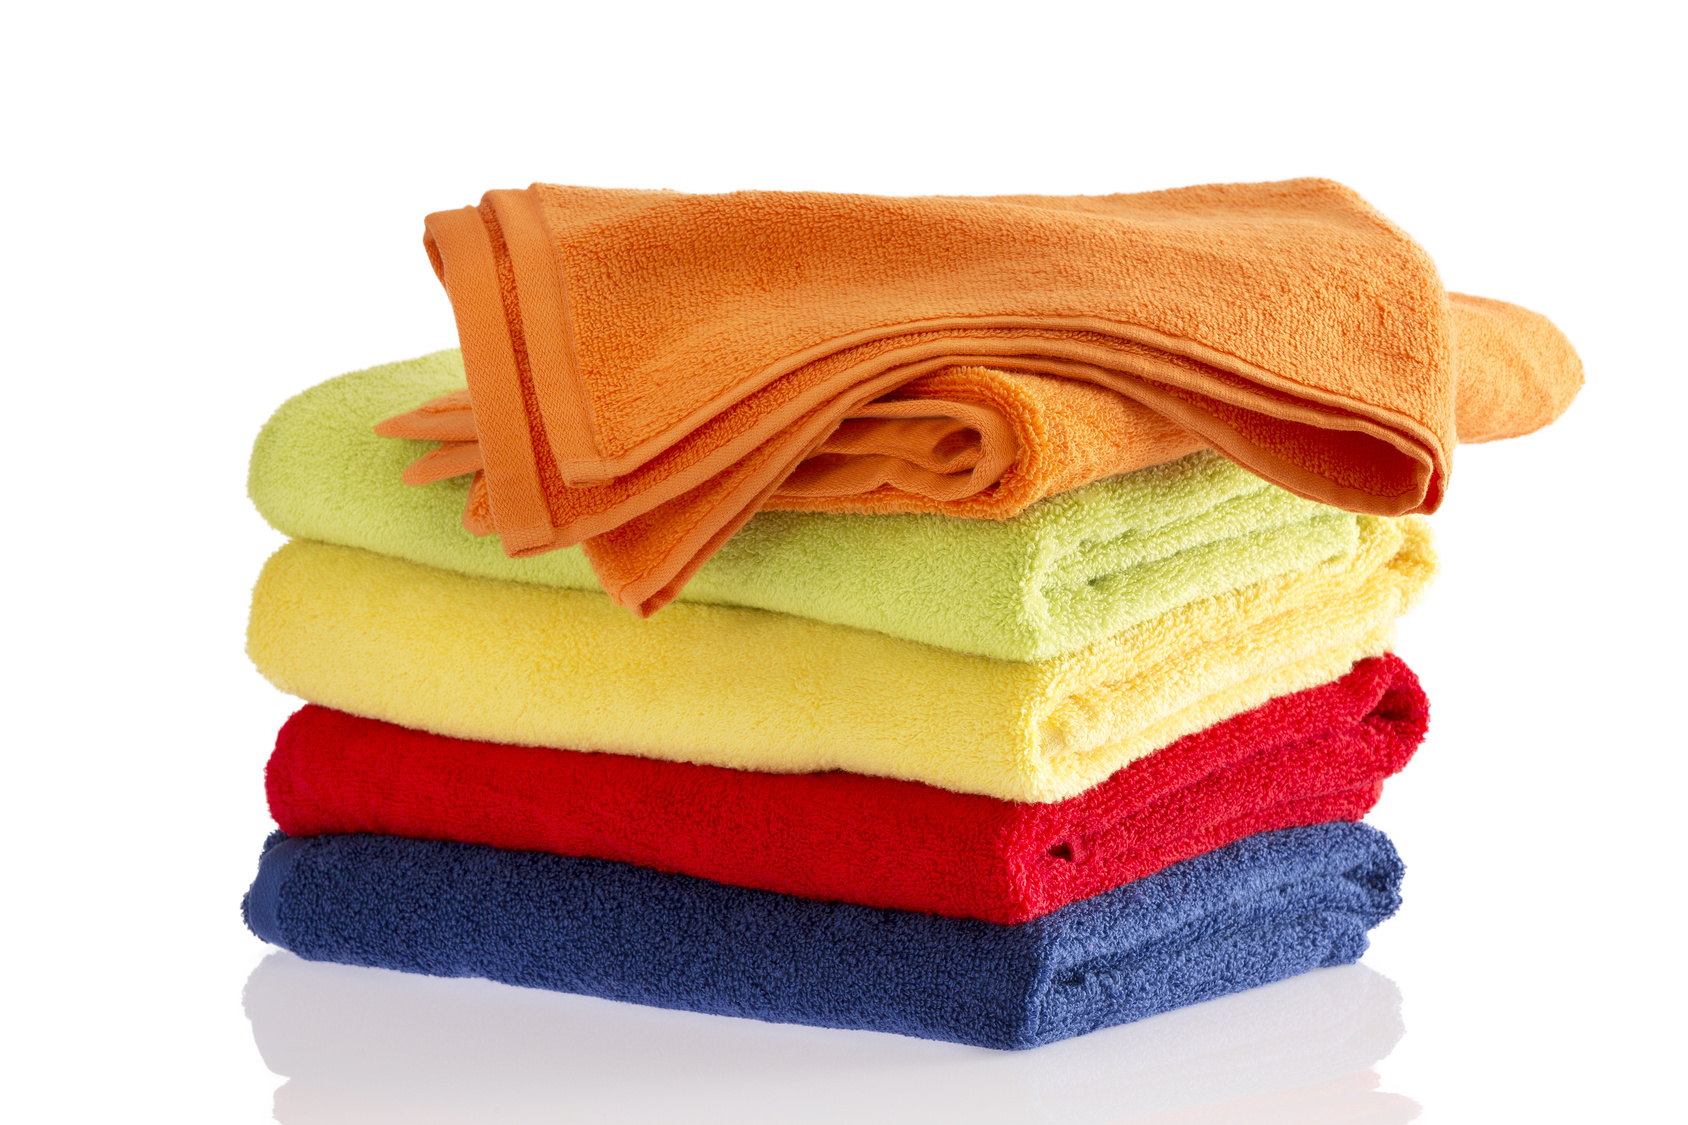 Folded-clothes-and-detergent 